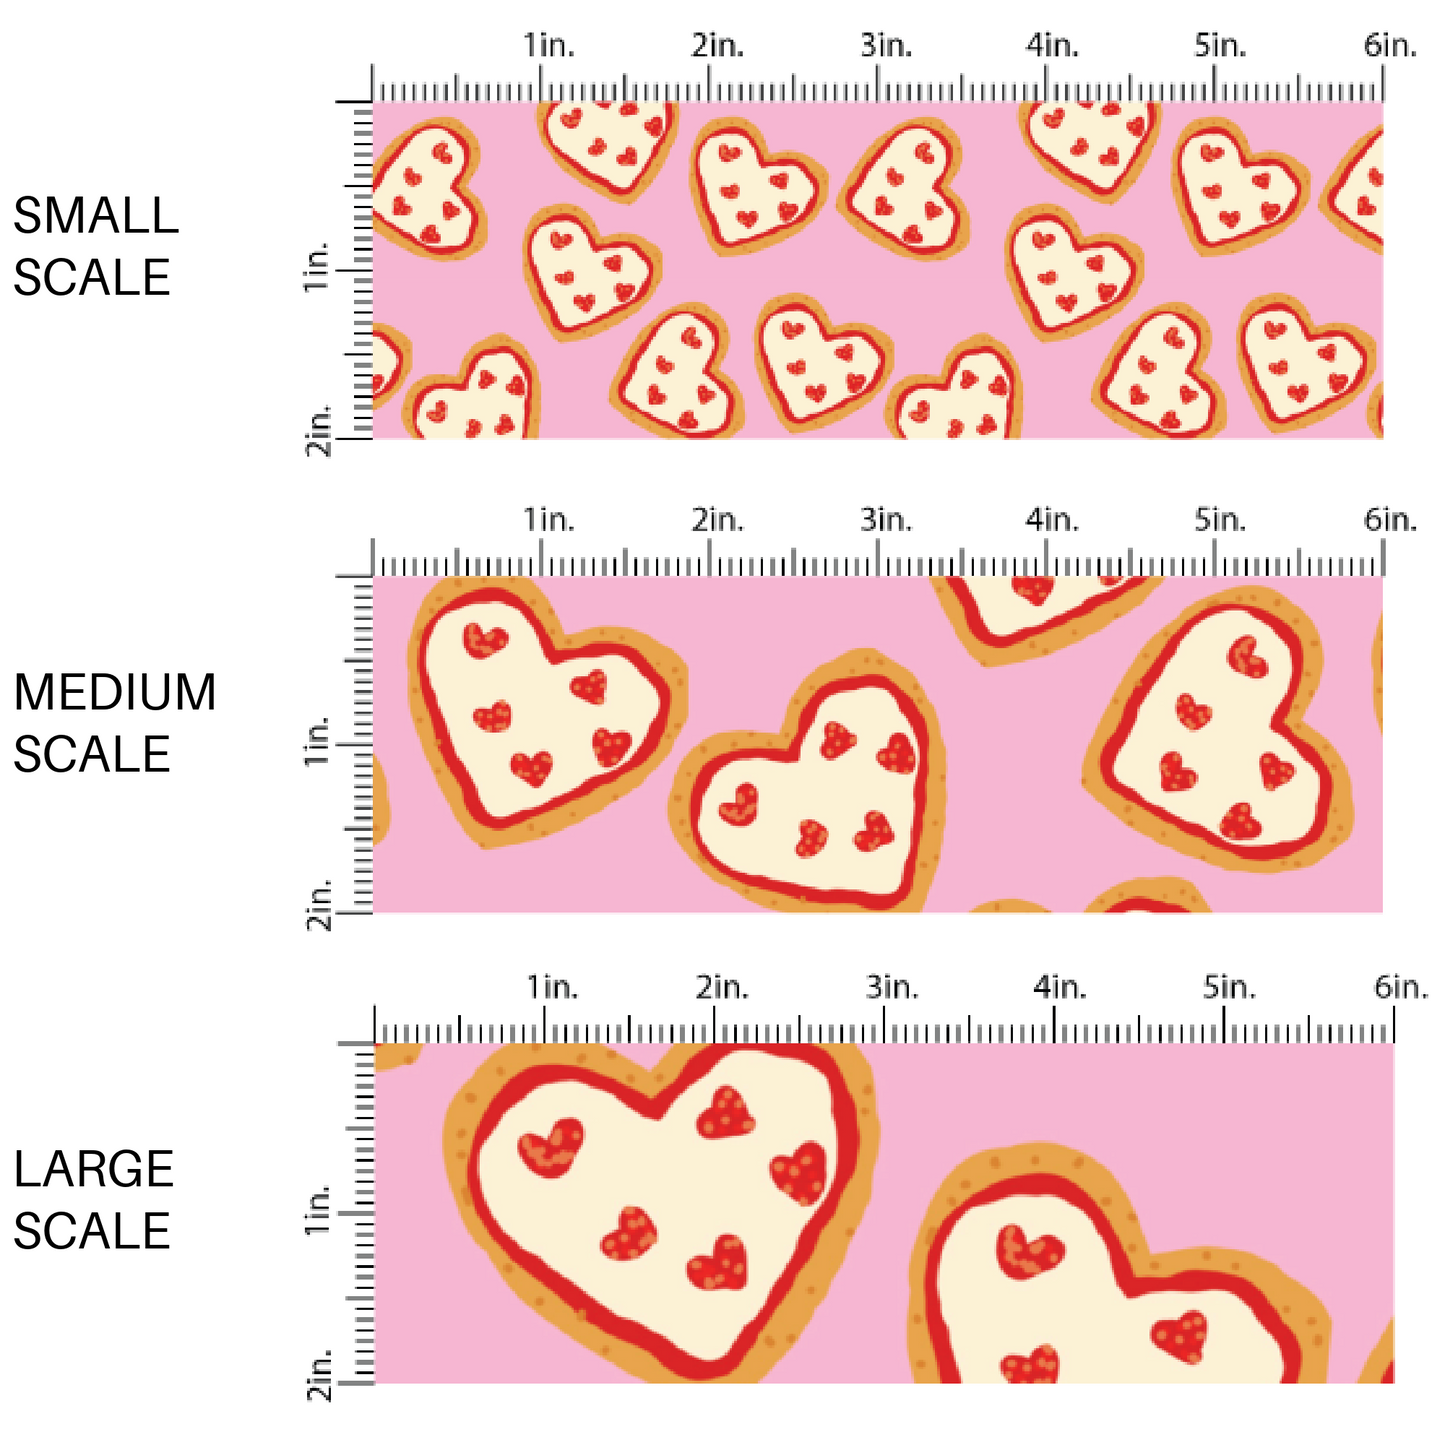 Heart Shaped Pizzas on Light Pink Fabric by the Yard scaled image guide.